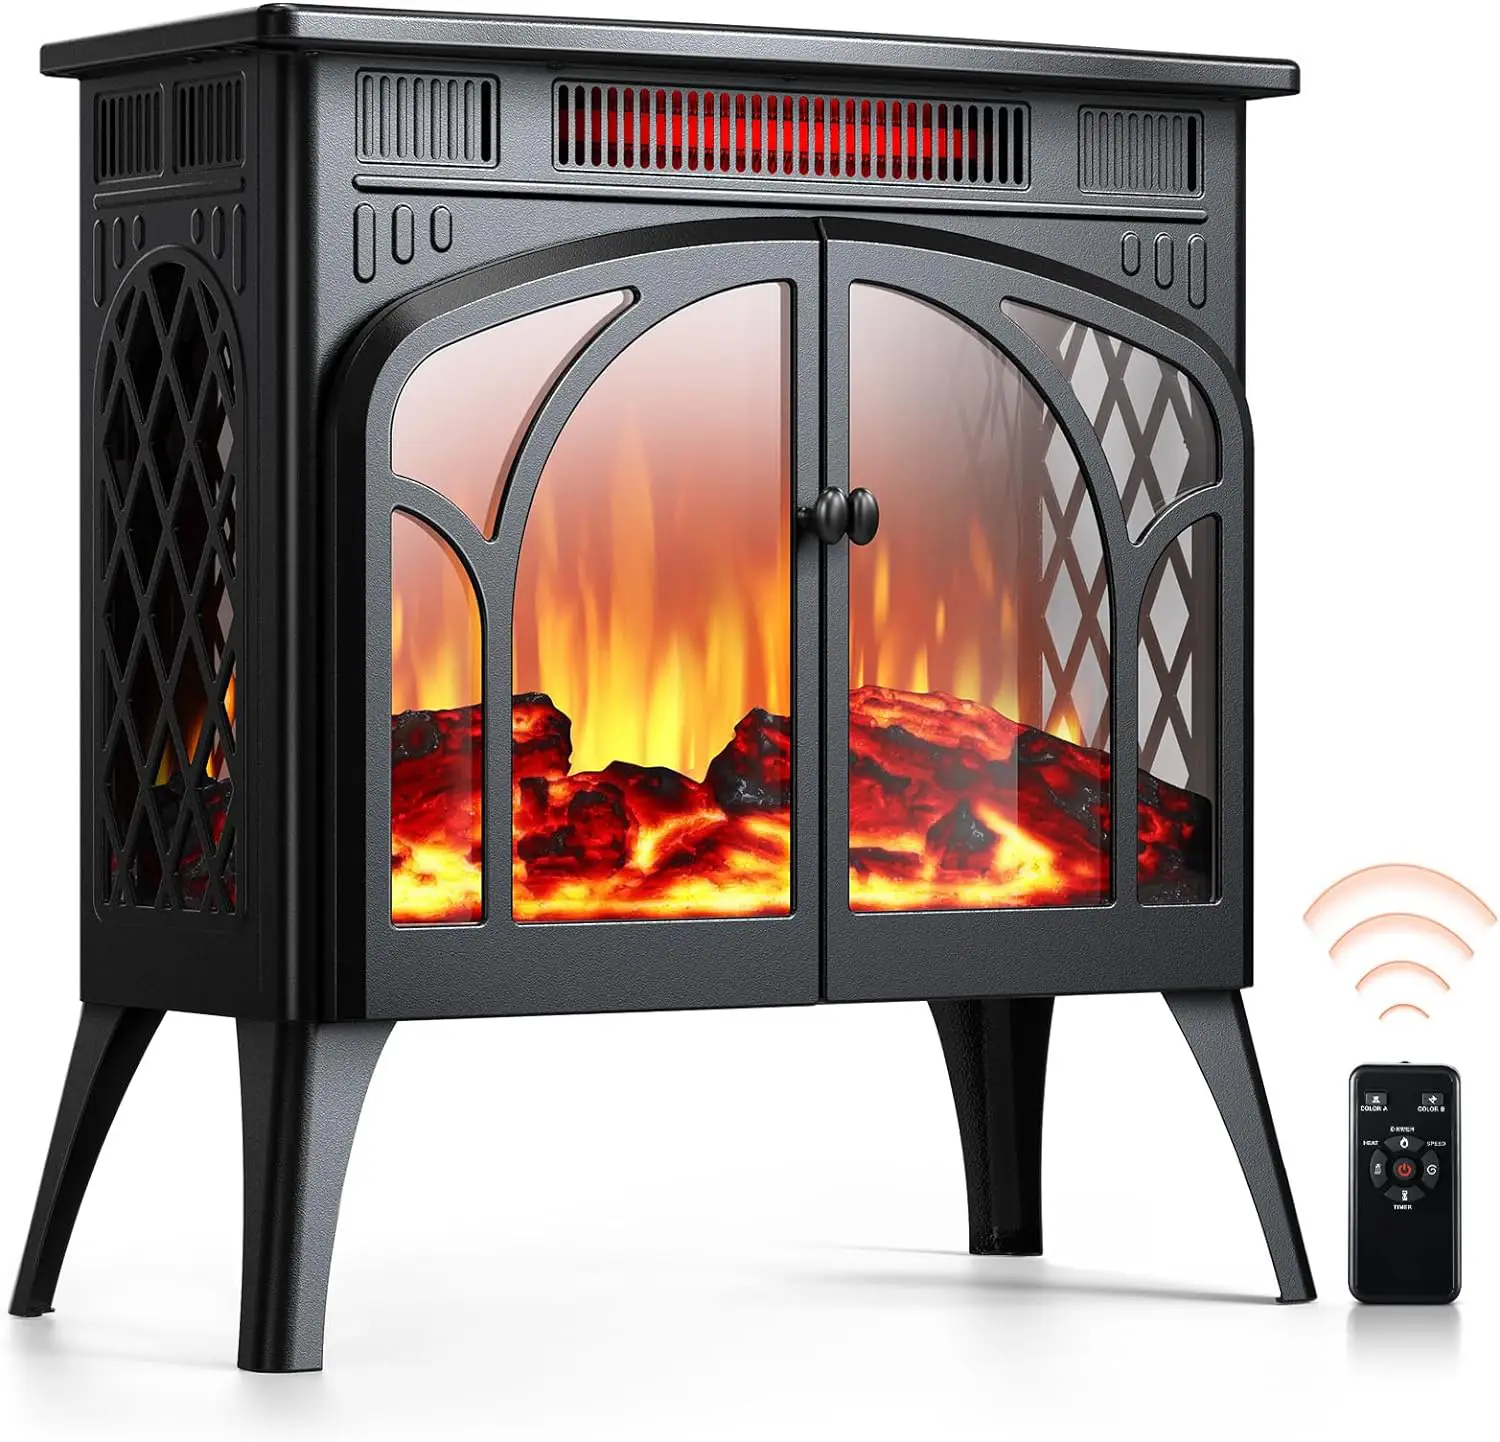 Rintuf Electric Fireplace Heater, 1500W Infrared Fireplace Stove